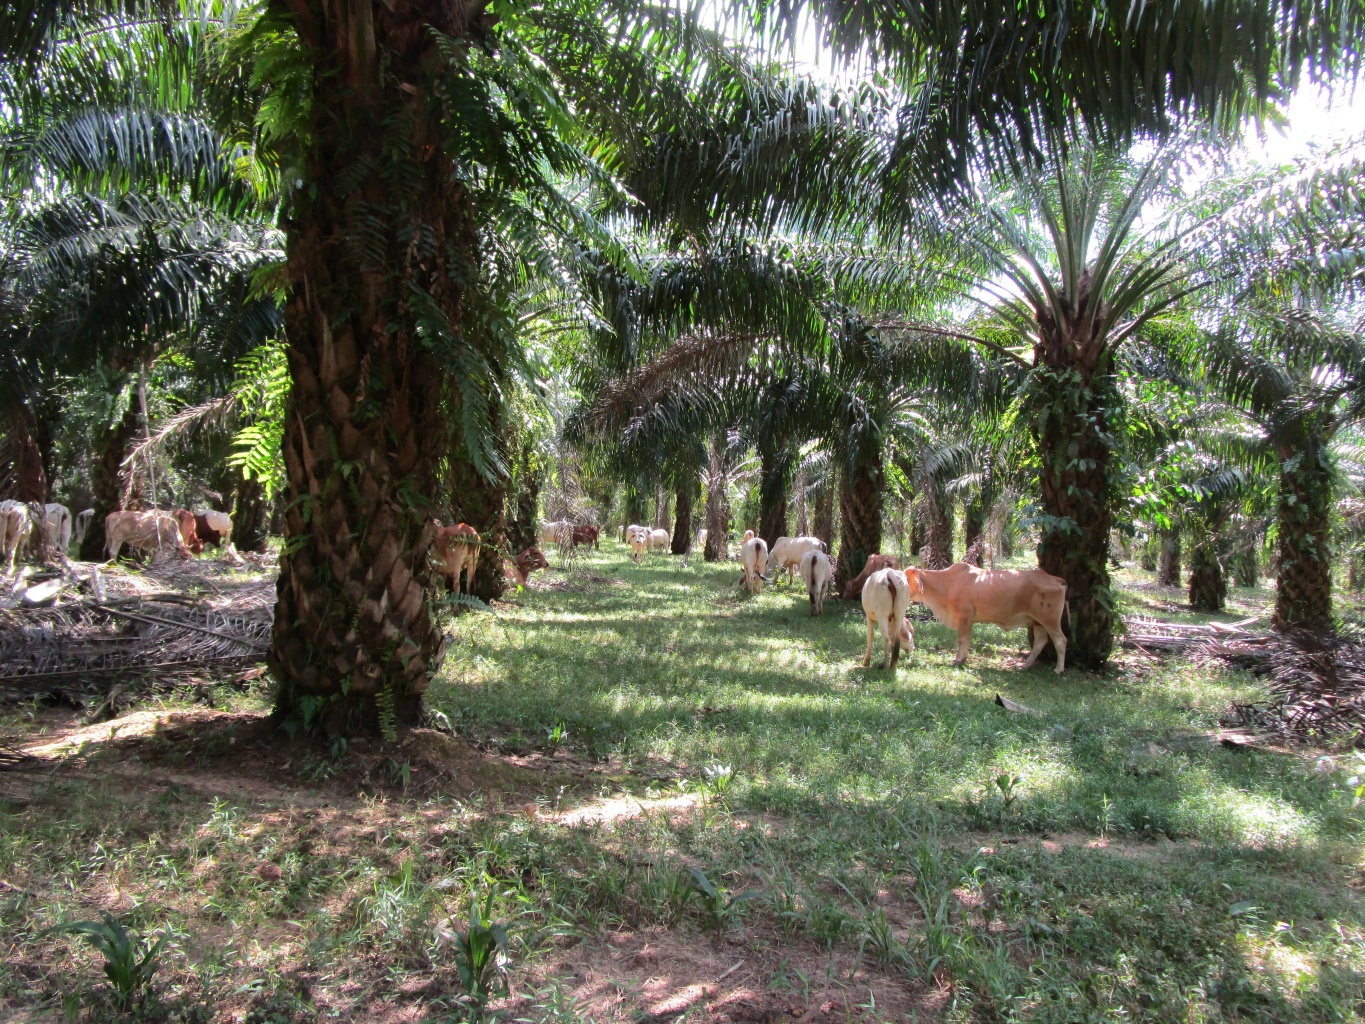 grazing in an oil palm plantation